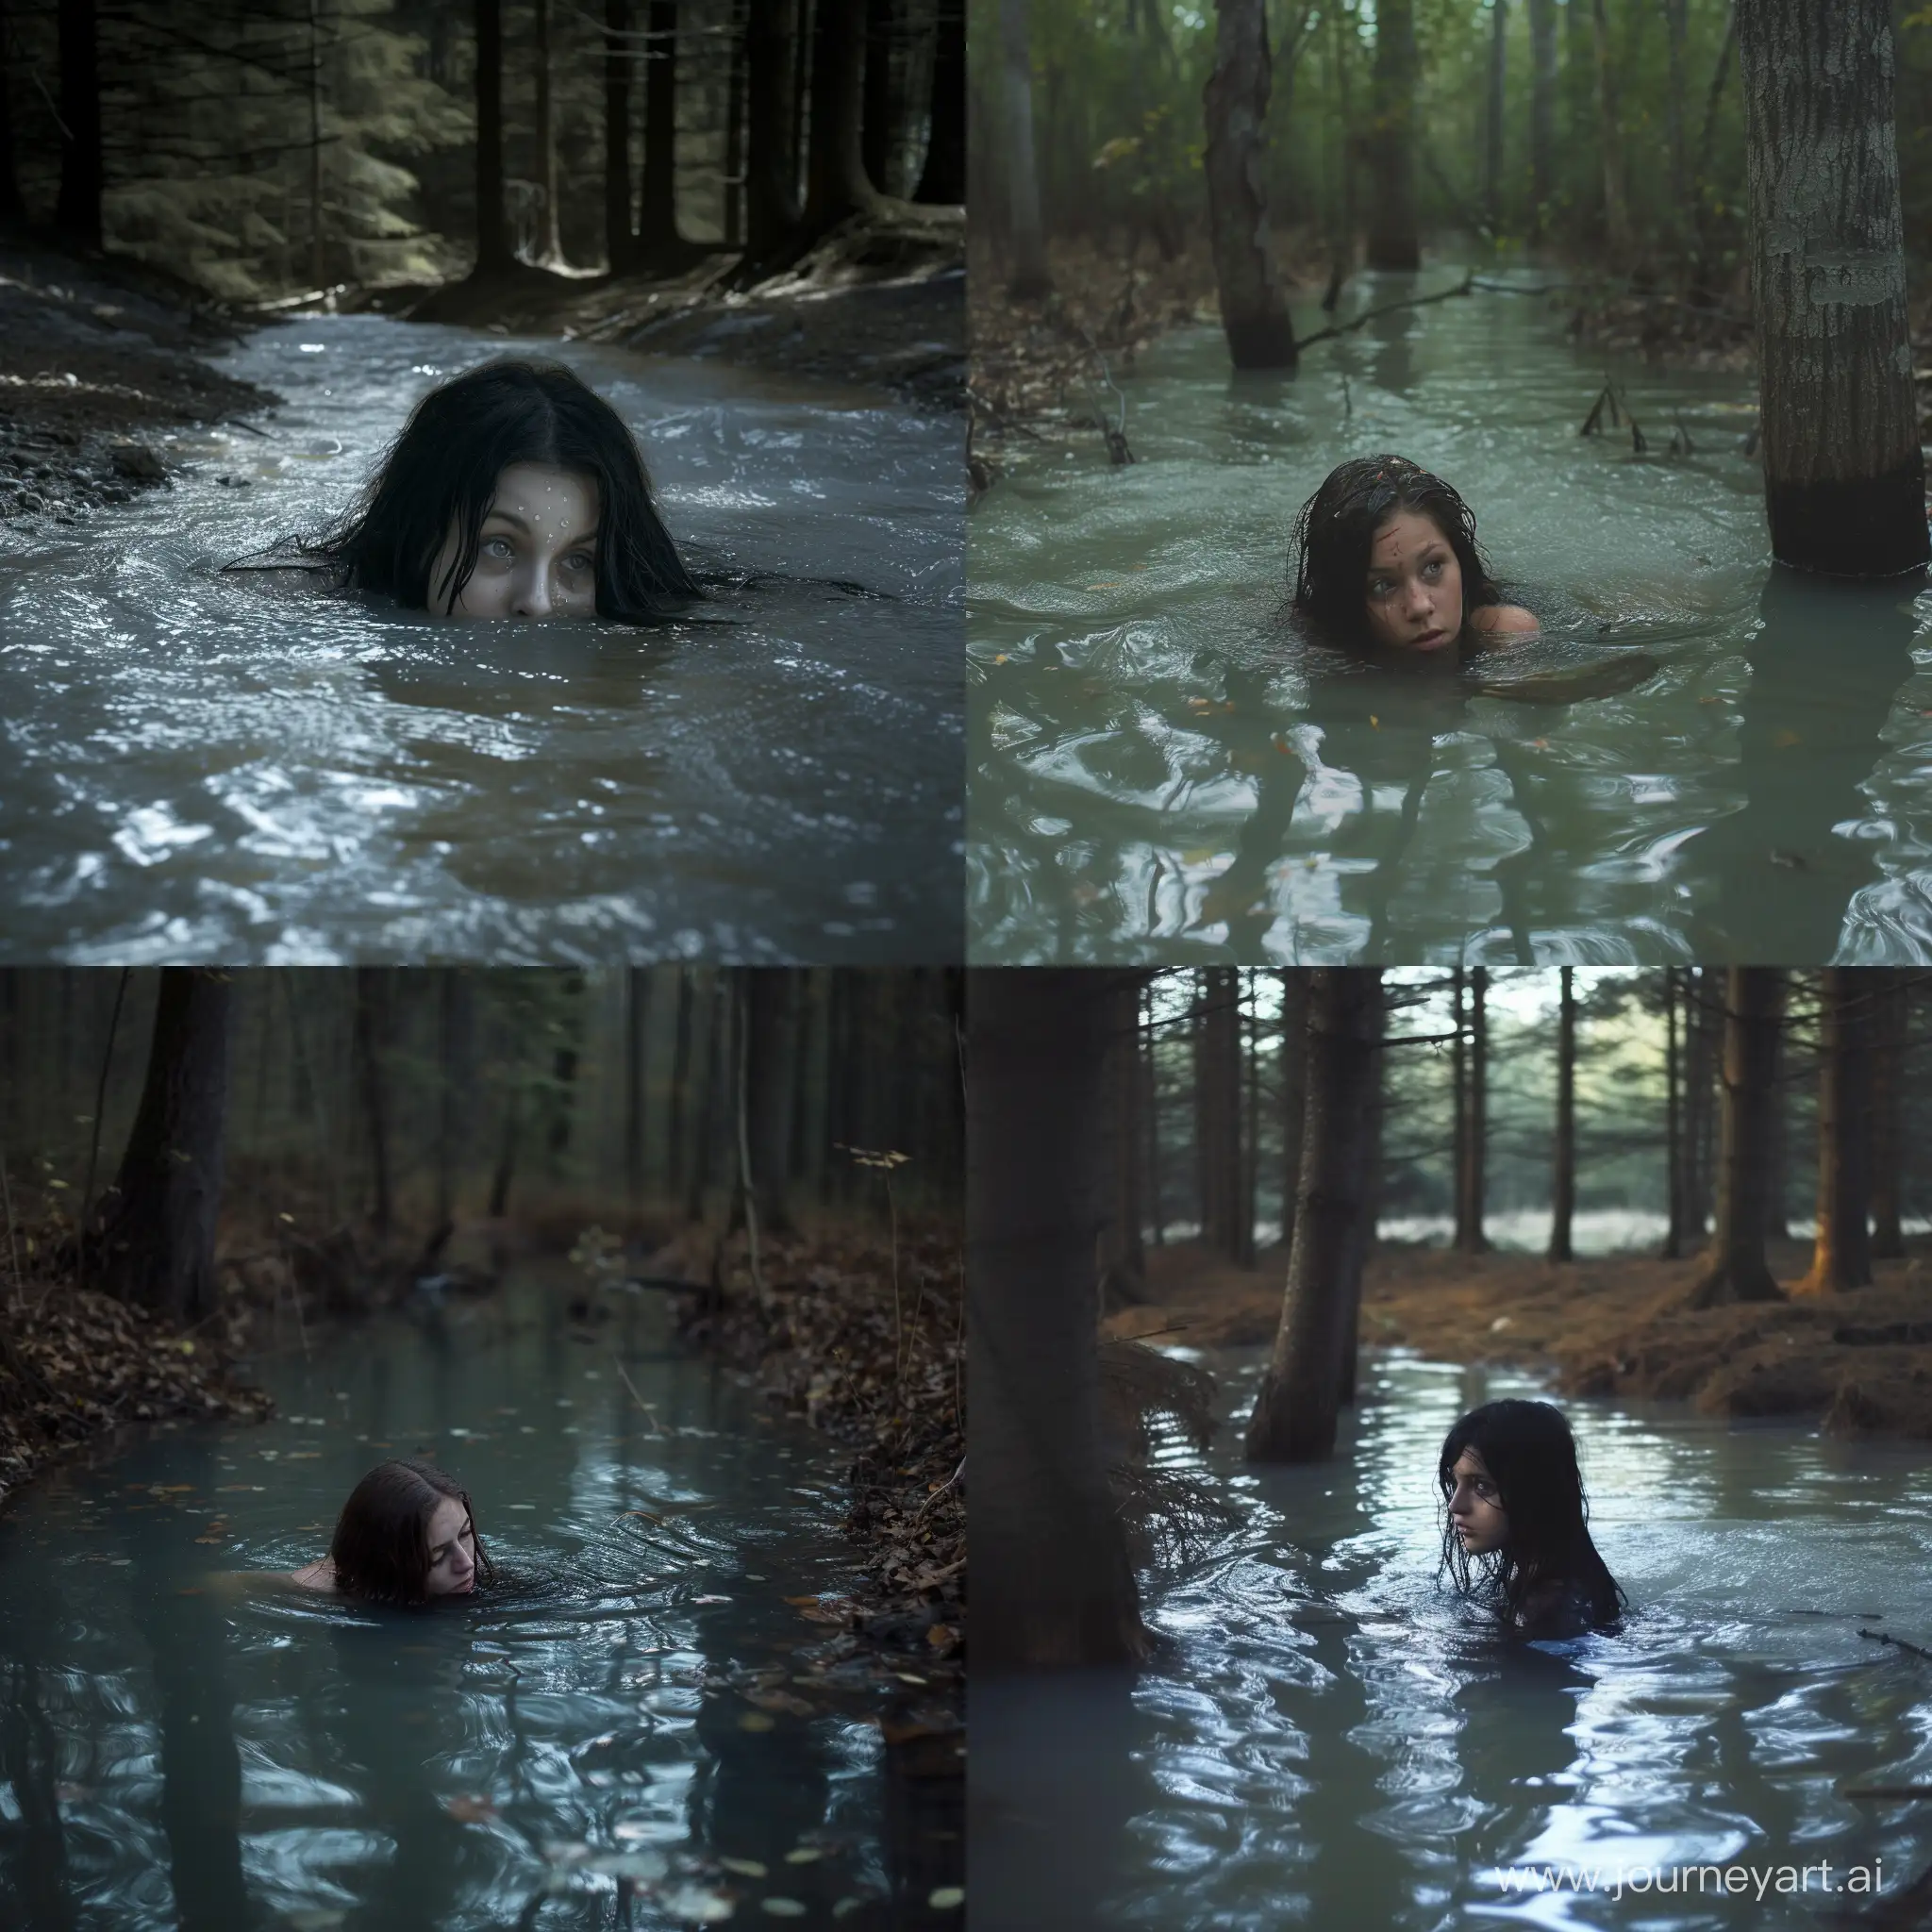 Eerie-Silver-Lake-Scene-Haunting-Image-of-a-Girl-in-Distress